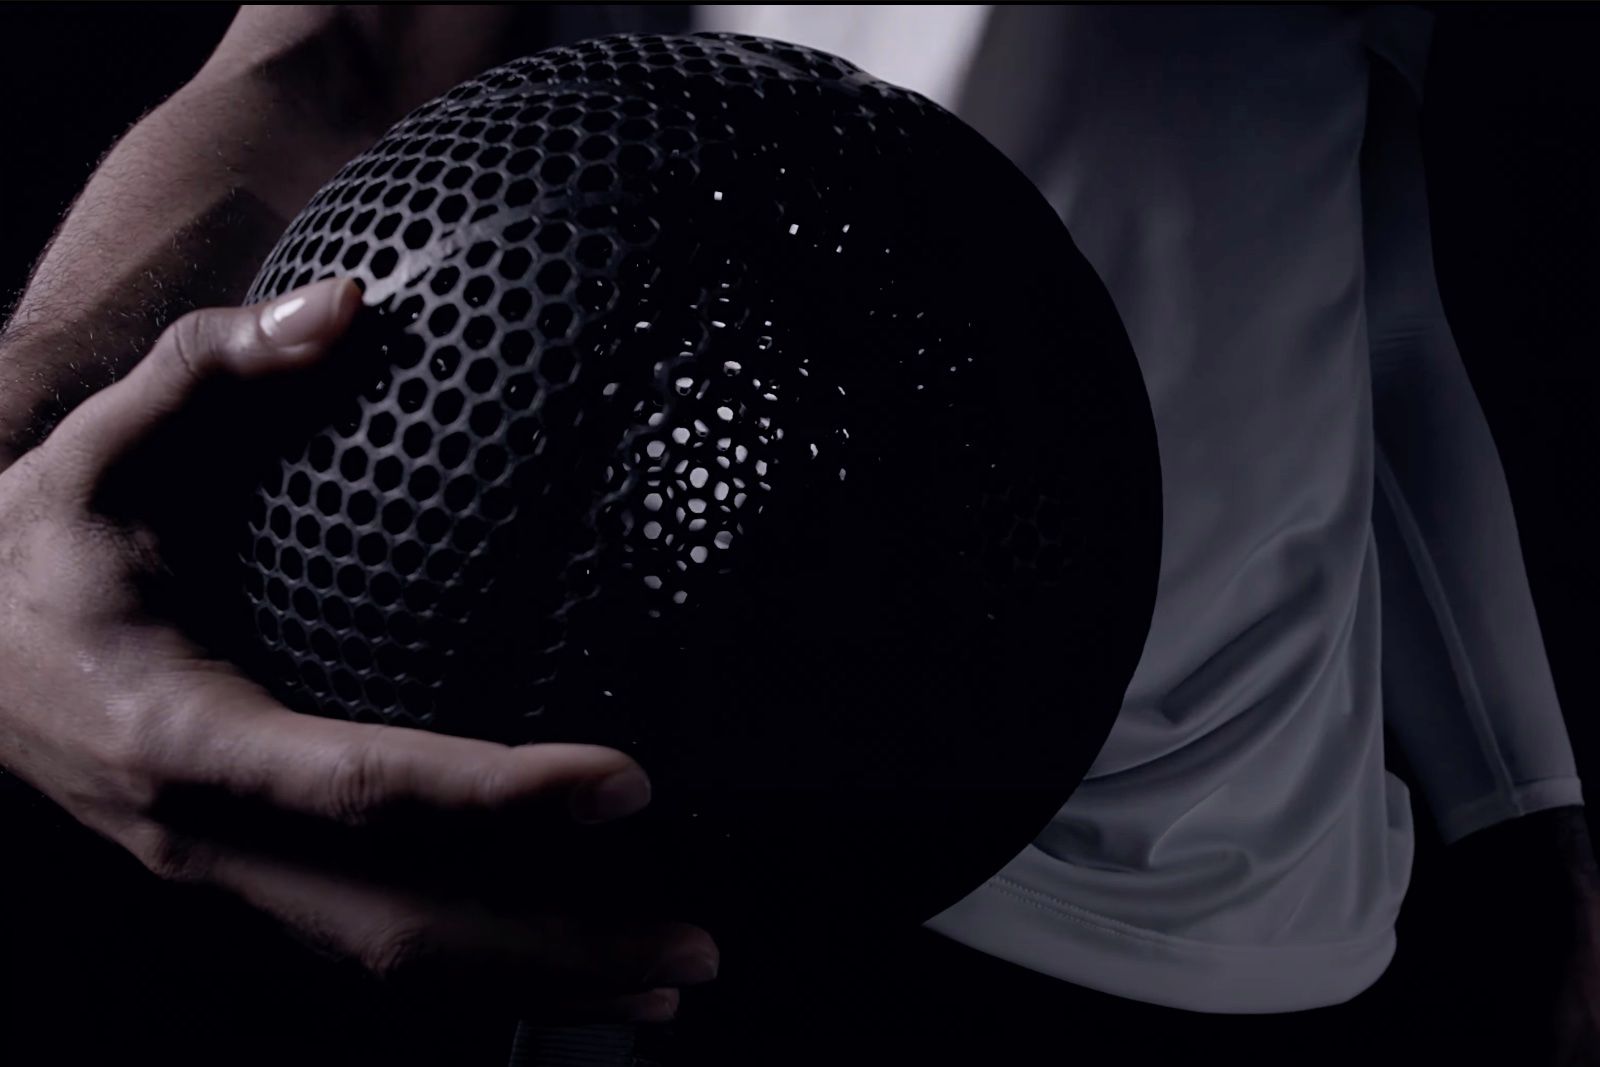 Wilson unveils revolutionary 3Dprinted airless basketball is this